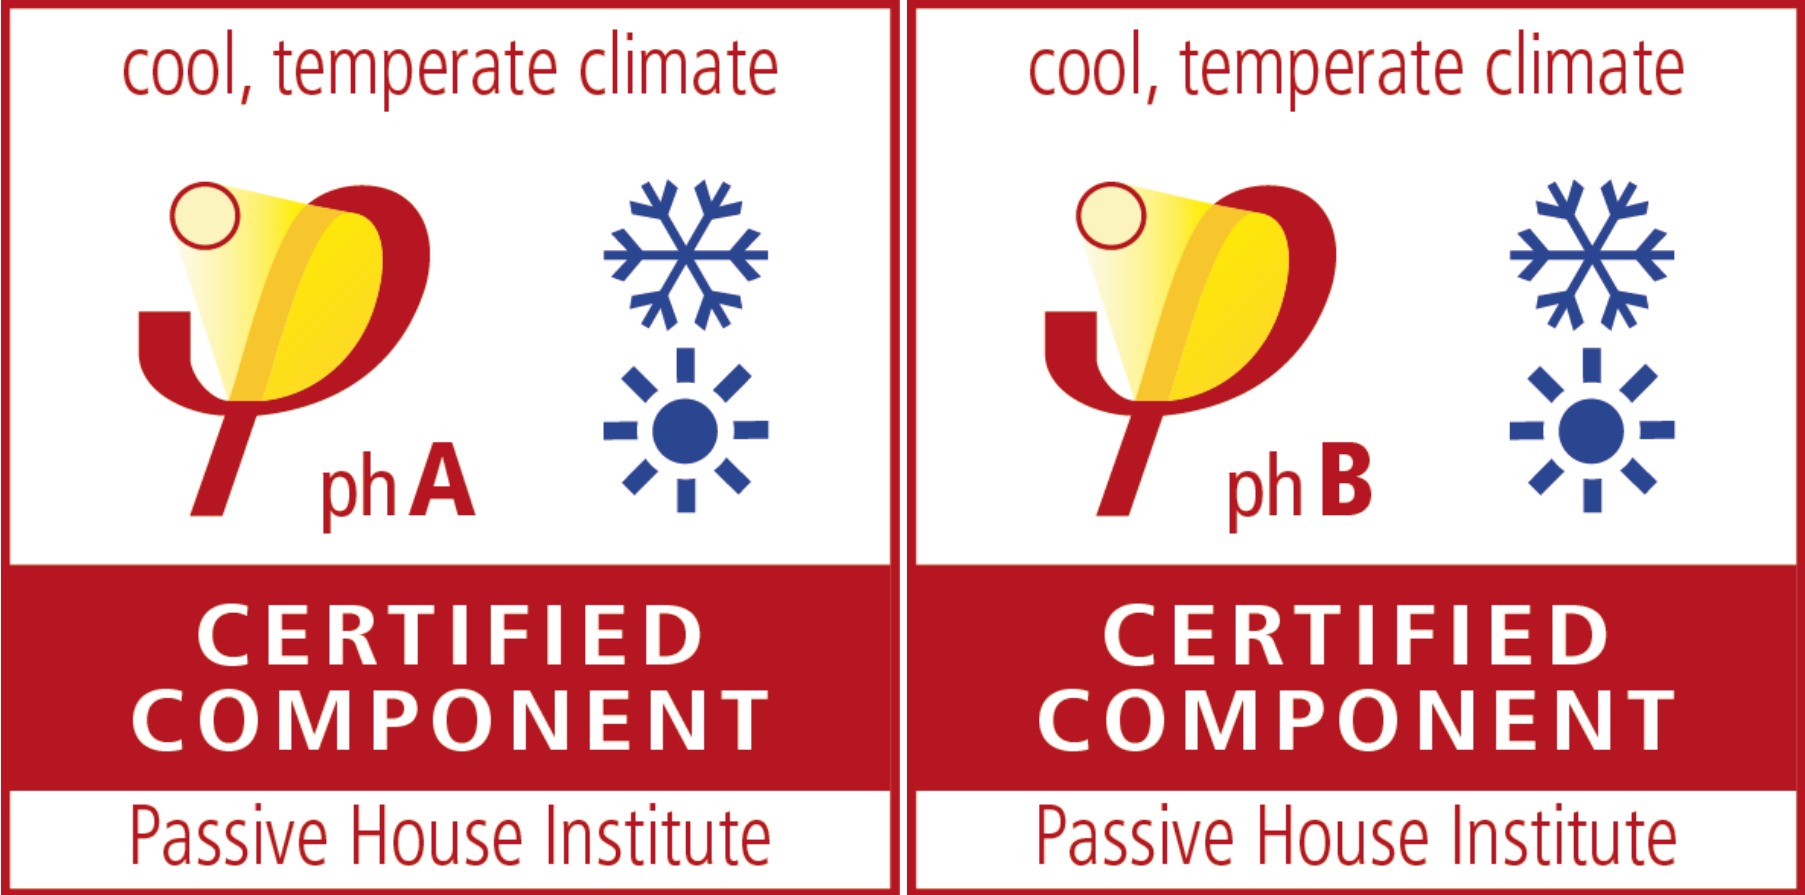 phA-phB-cold-temperate-climate